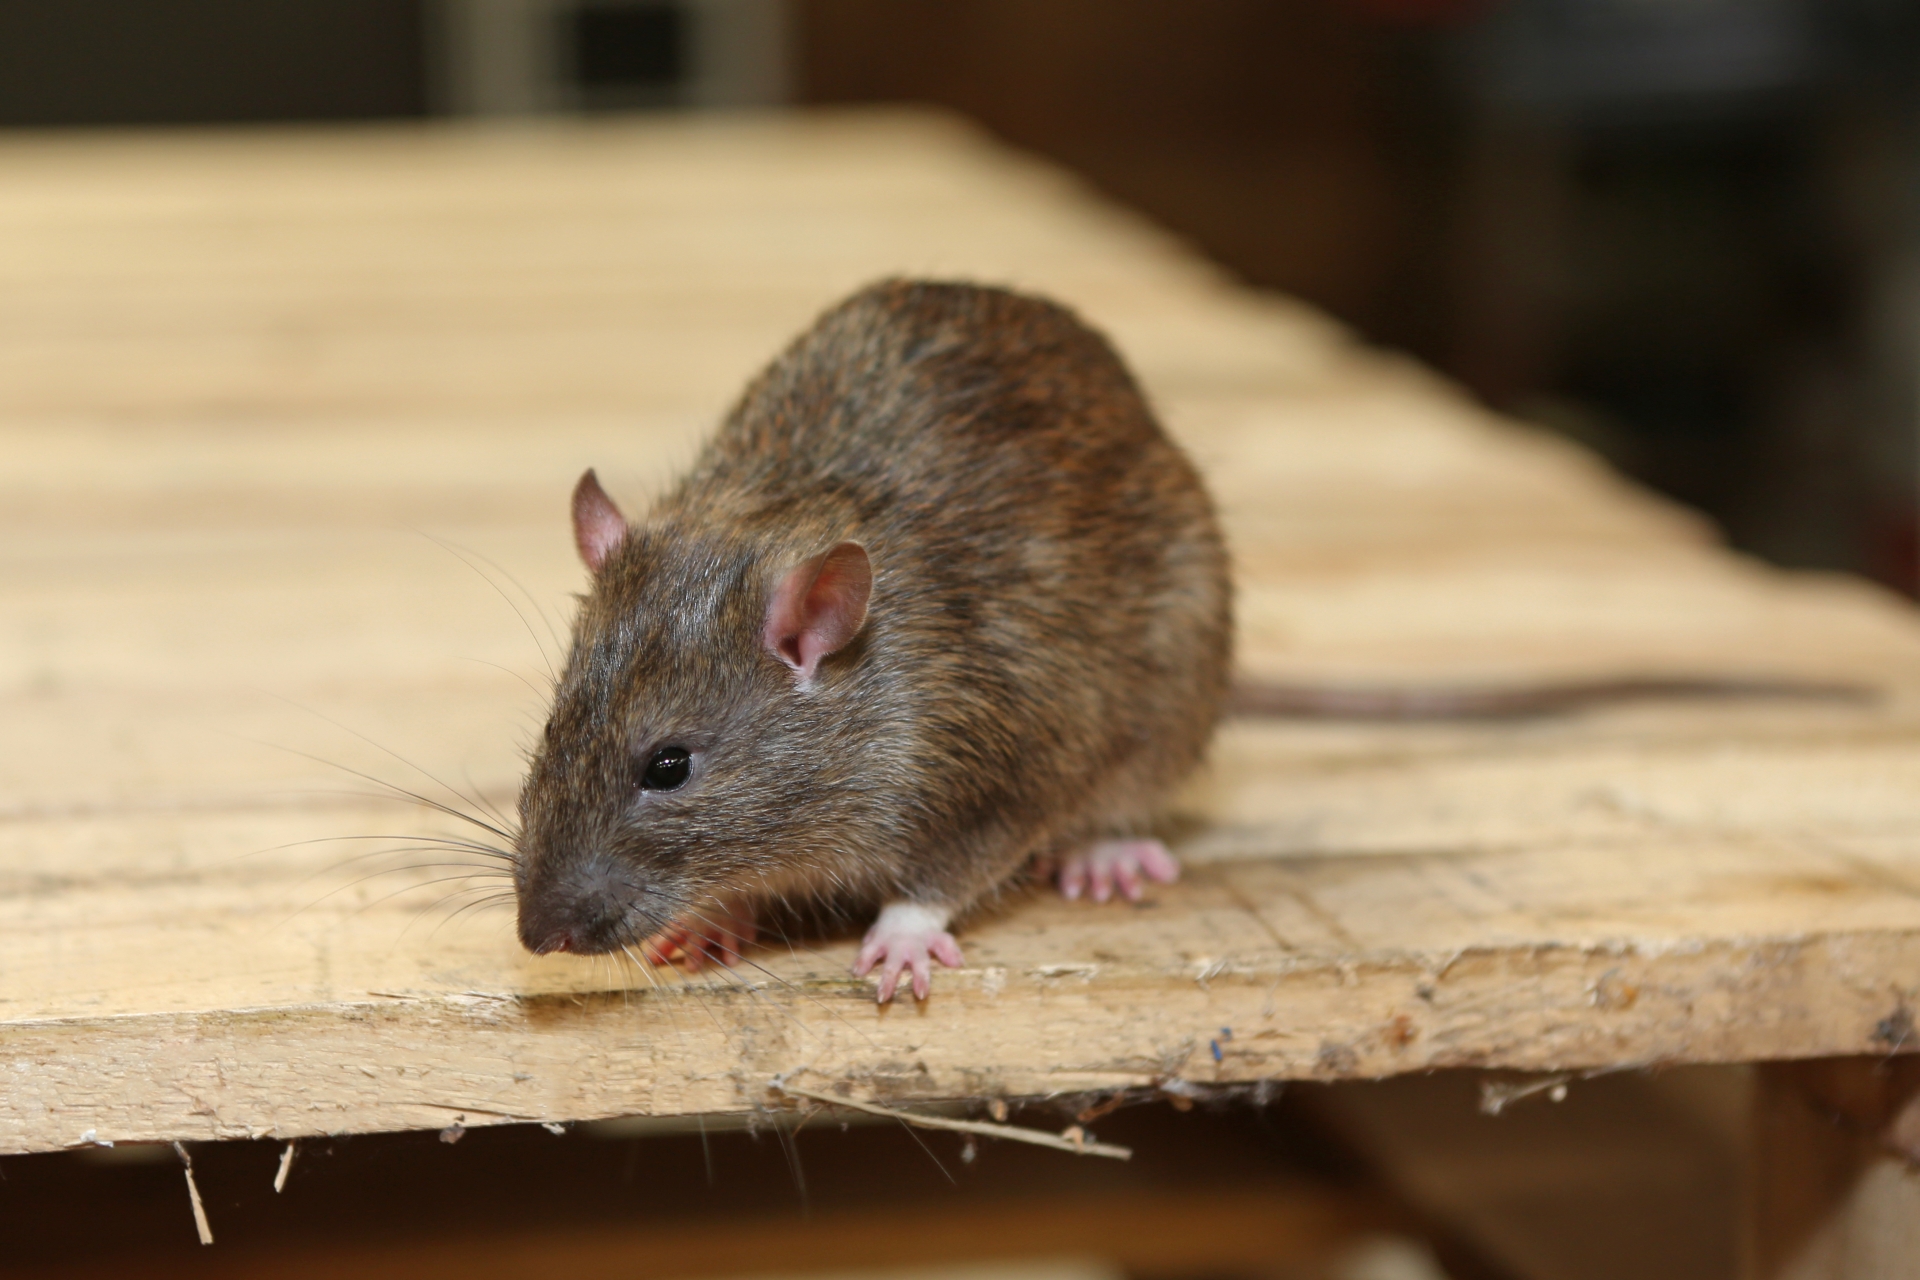 Rat Infestation, Pest Control in North Finchley, Woodside Park, N12. Call Now 020 8166 9746